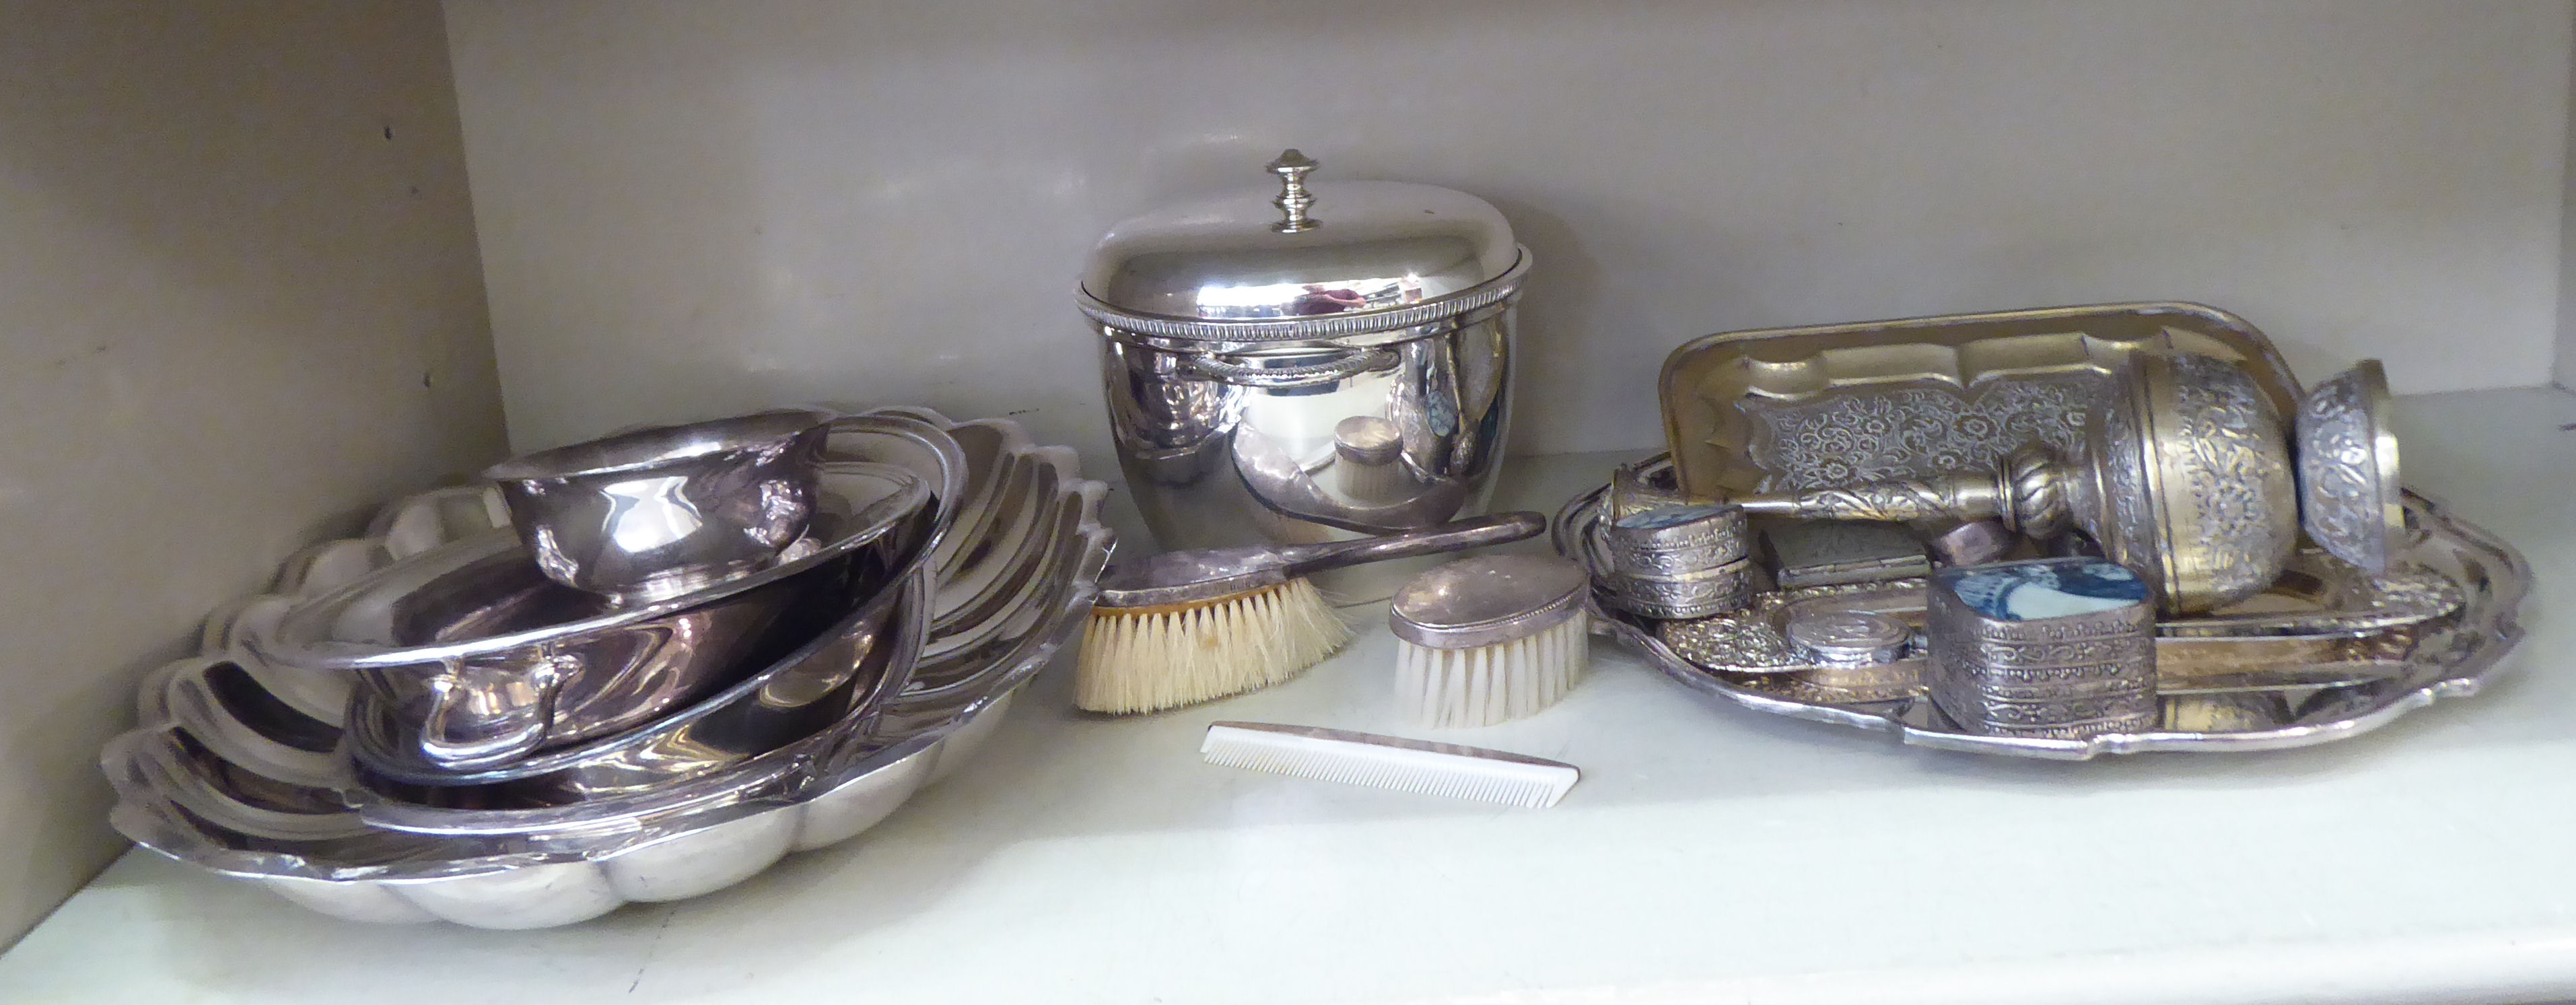 Silver plated and other metalware: to include a salver  12"dia; and a covered serving bowl  7"dia